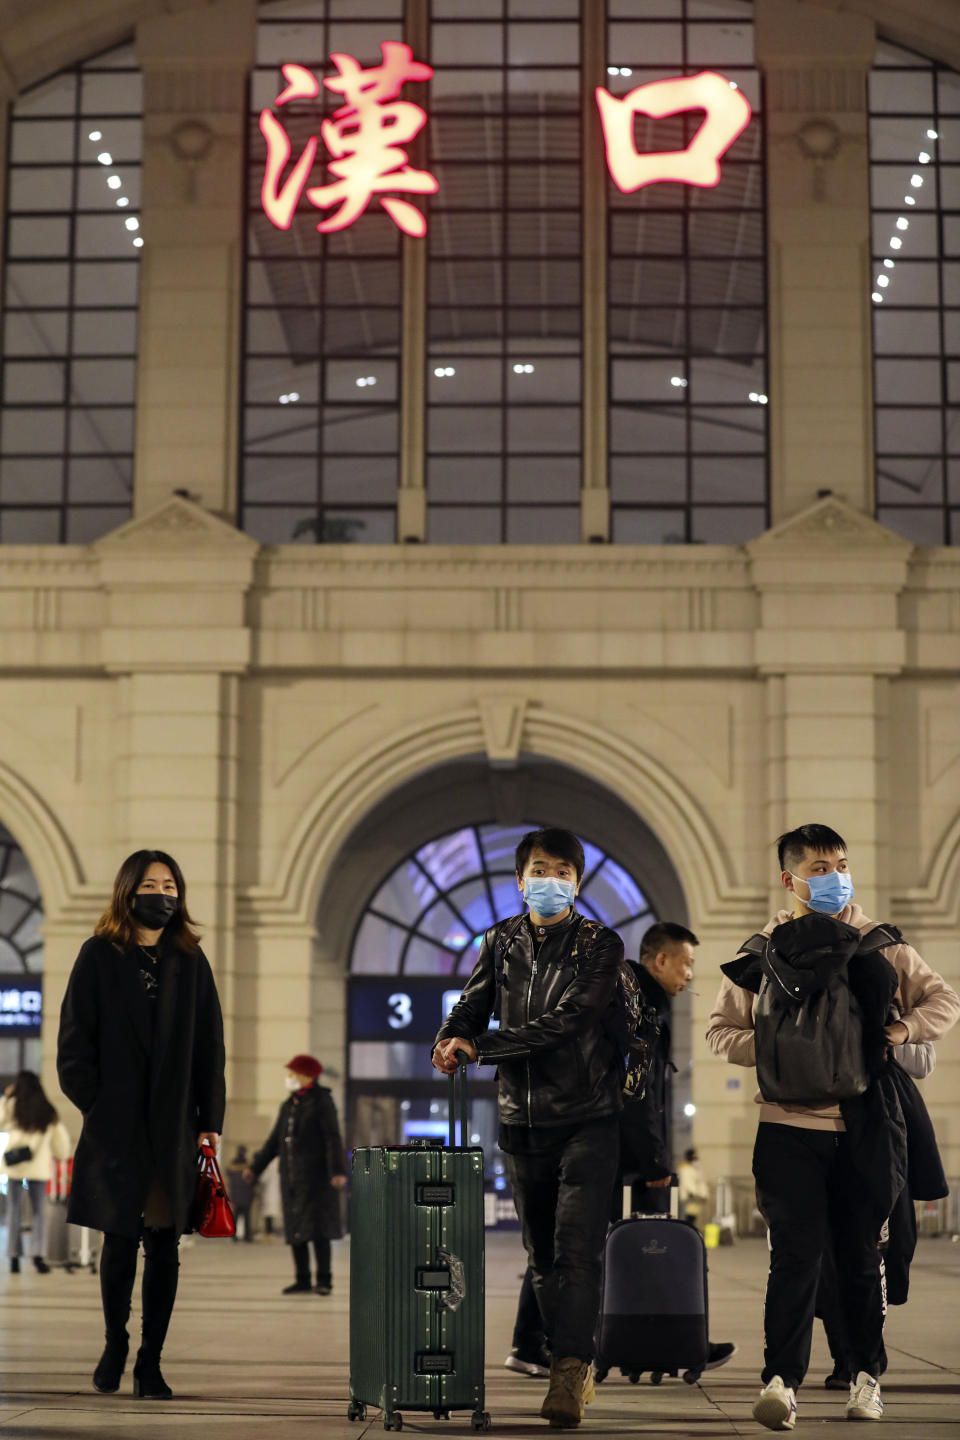 In this Jan. 21, 2020, photo, passengers wearing protective masks walk outside Hankou Railway Station in Wuhan in central China's Hubei province before authorities seals the city. For weeks after the first reports of a mysterious new virus in Wuhan, people poured out of the central Chinese city, cramming onto buses, trains and airplanes as the first wave of China's great Lunar New Year migration broke across the nation. Some carried with them a new virus that has claimed over 560 lives and sickened more than 28,000 people. (Chinatopix via AP)